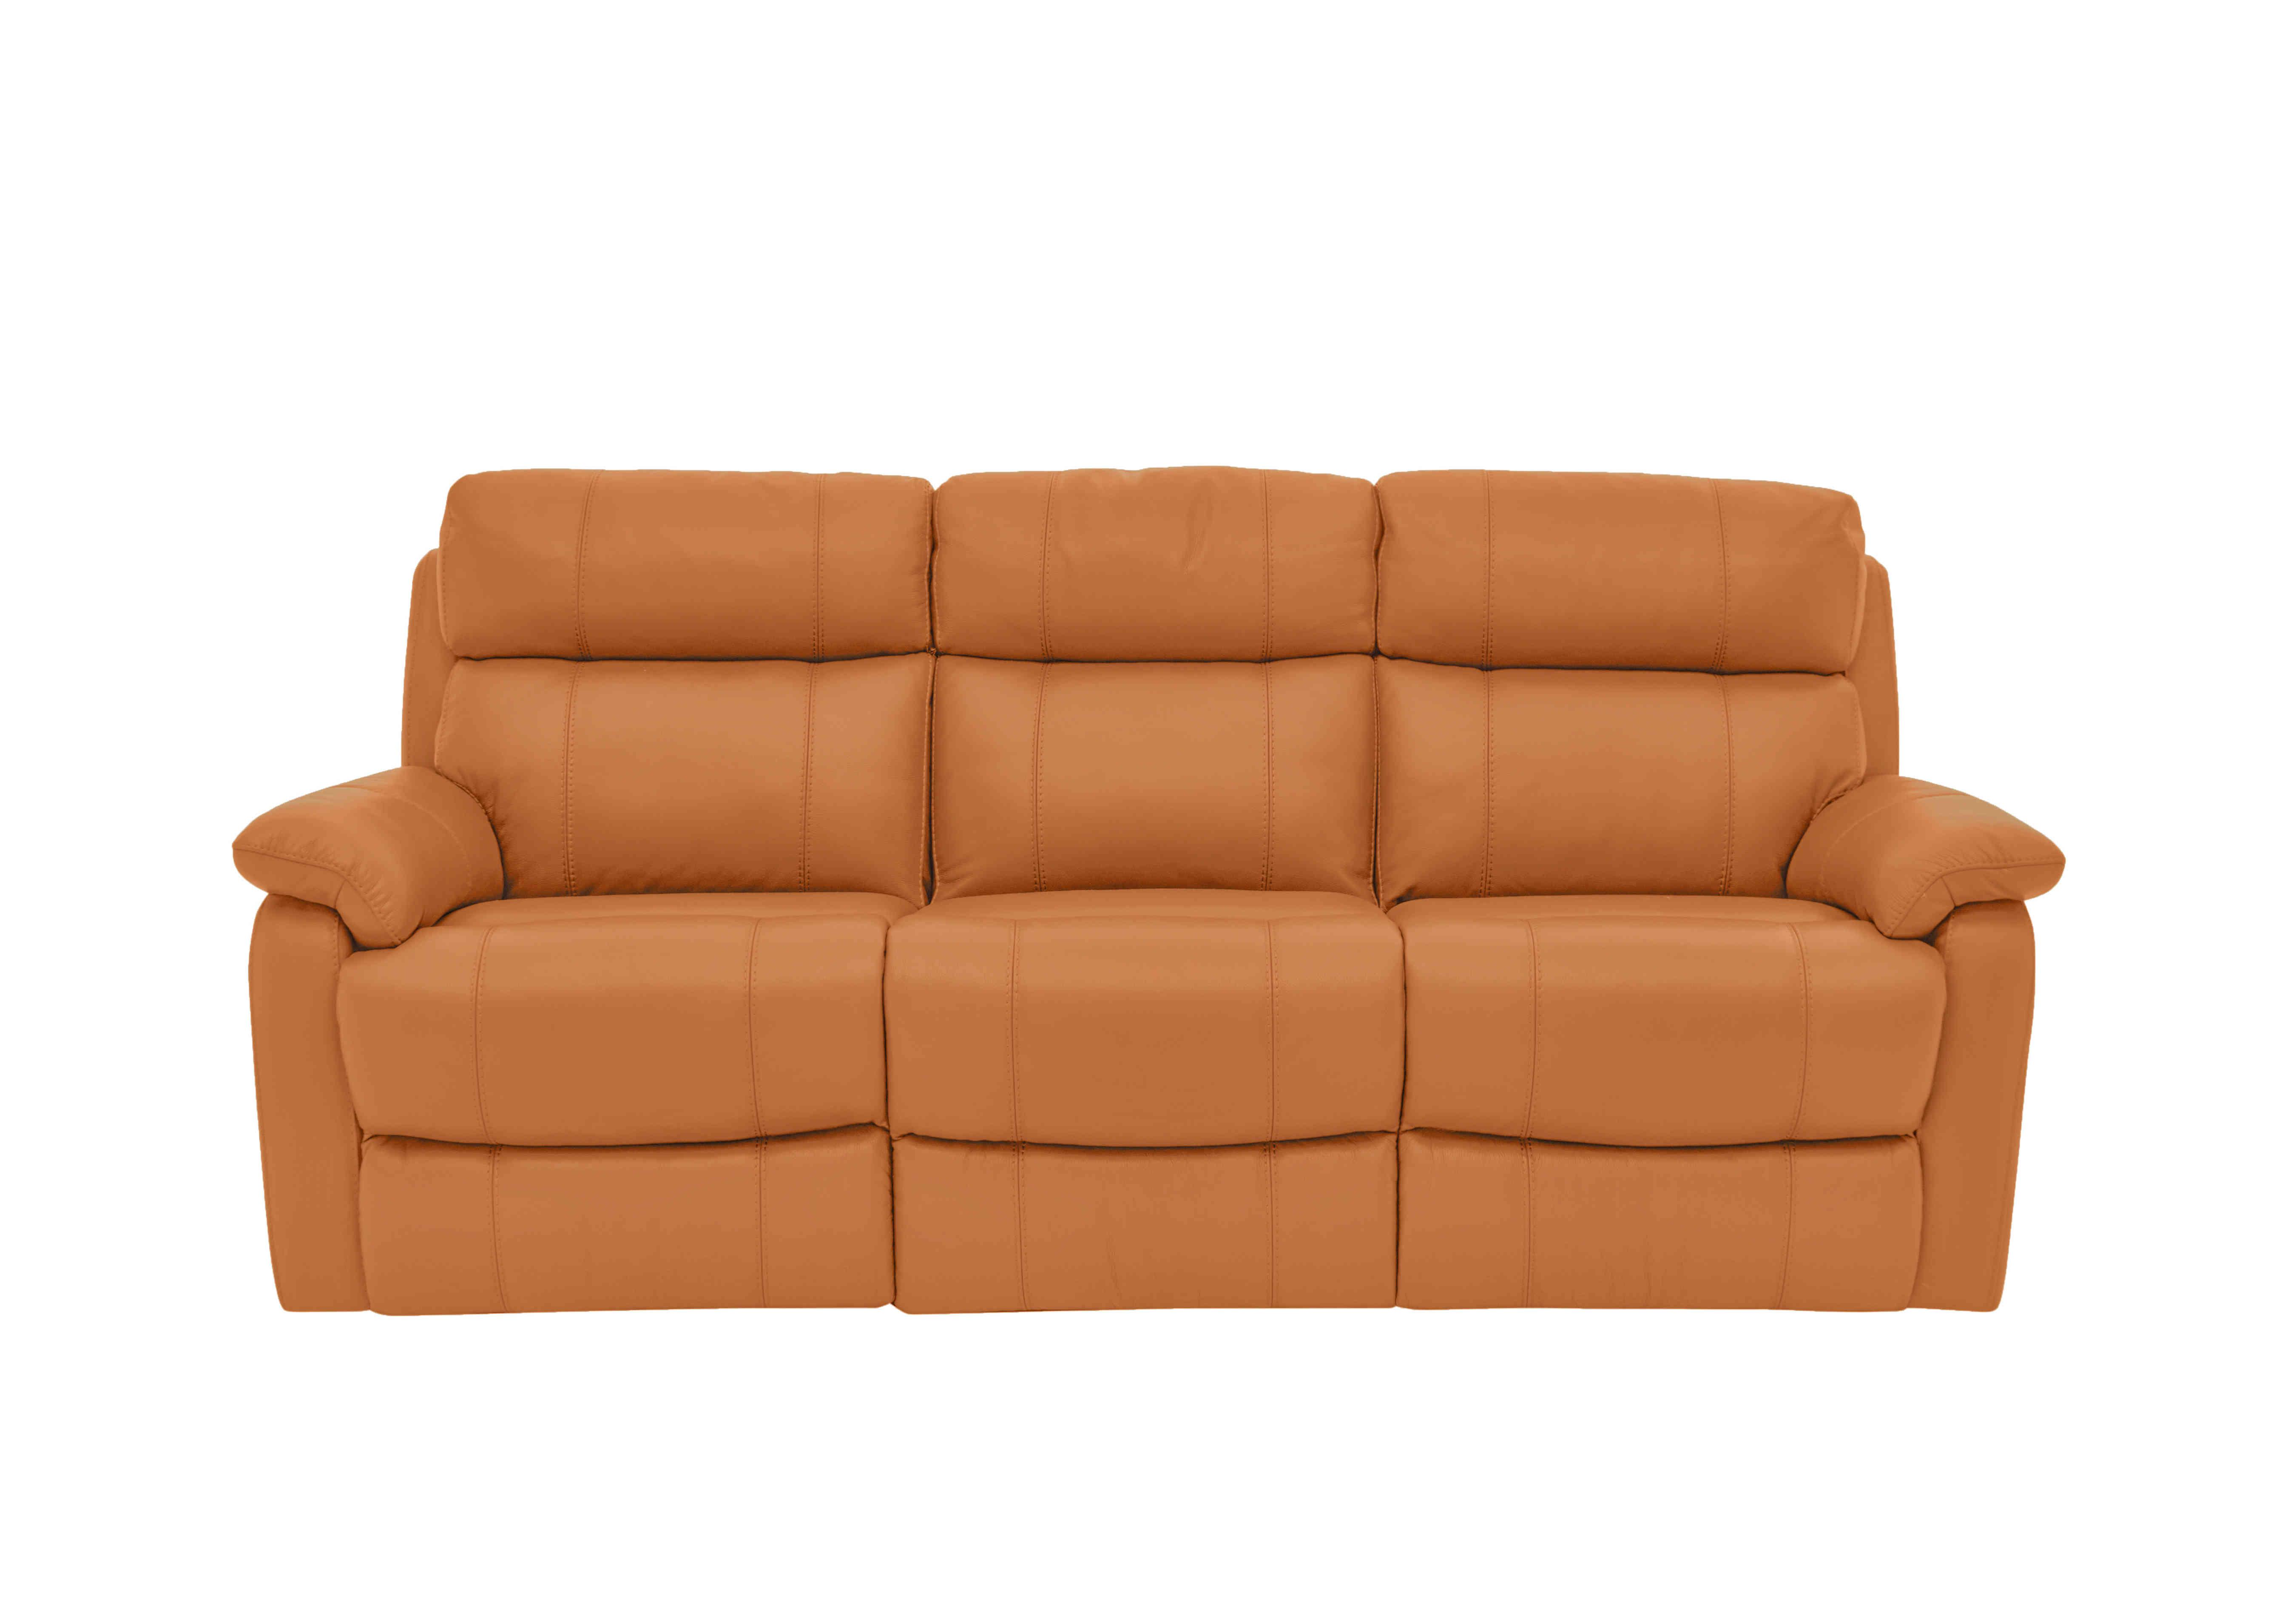 Relax Station Komodo 3 Seater Power Leather Sofa in Bv-335e Honey Yellow on Furniture Village